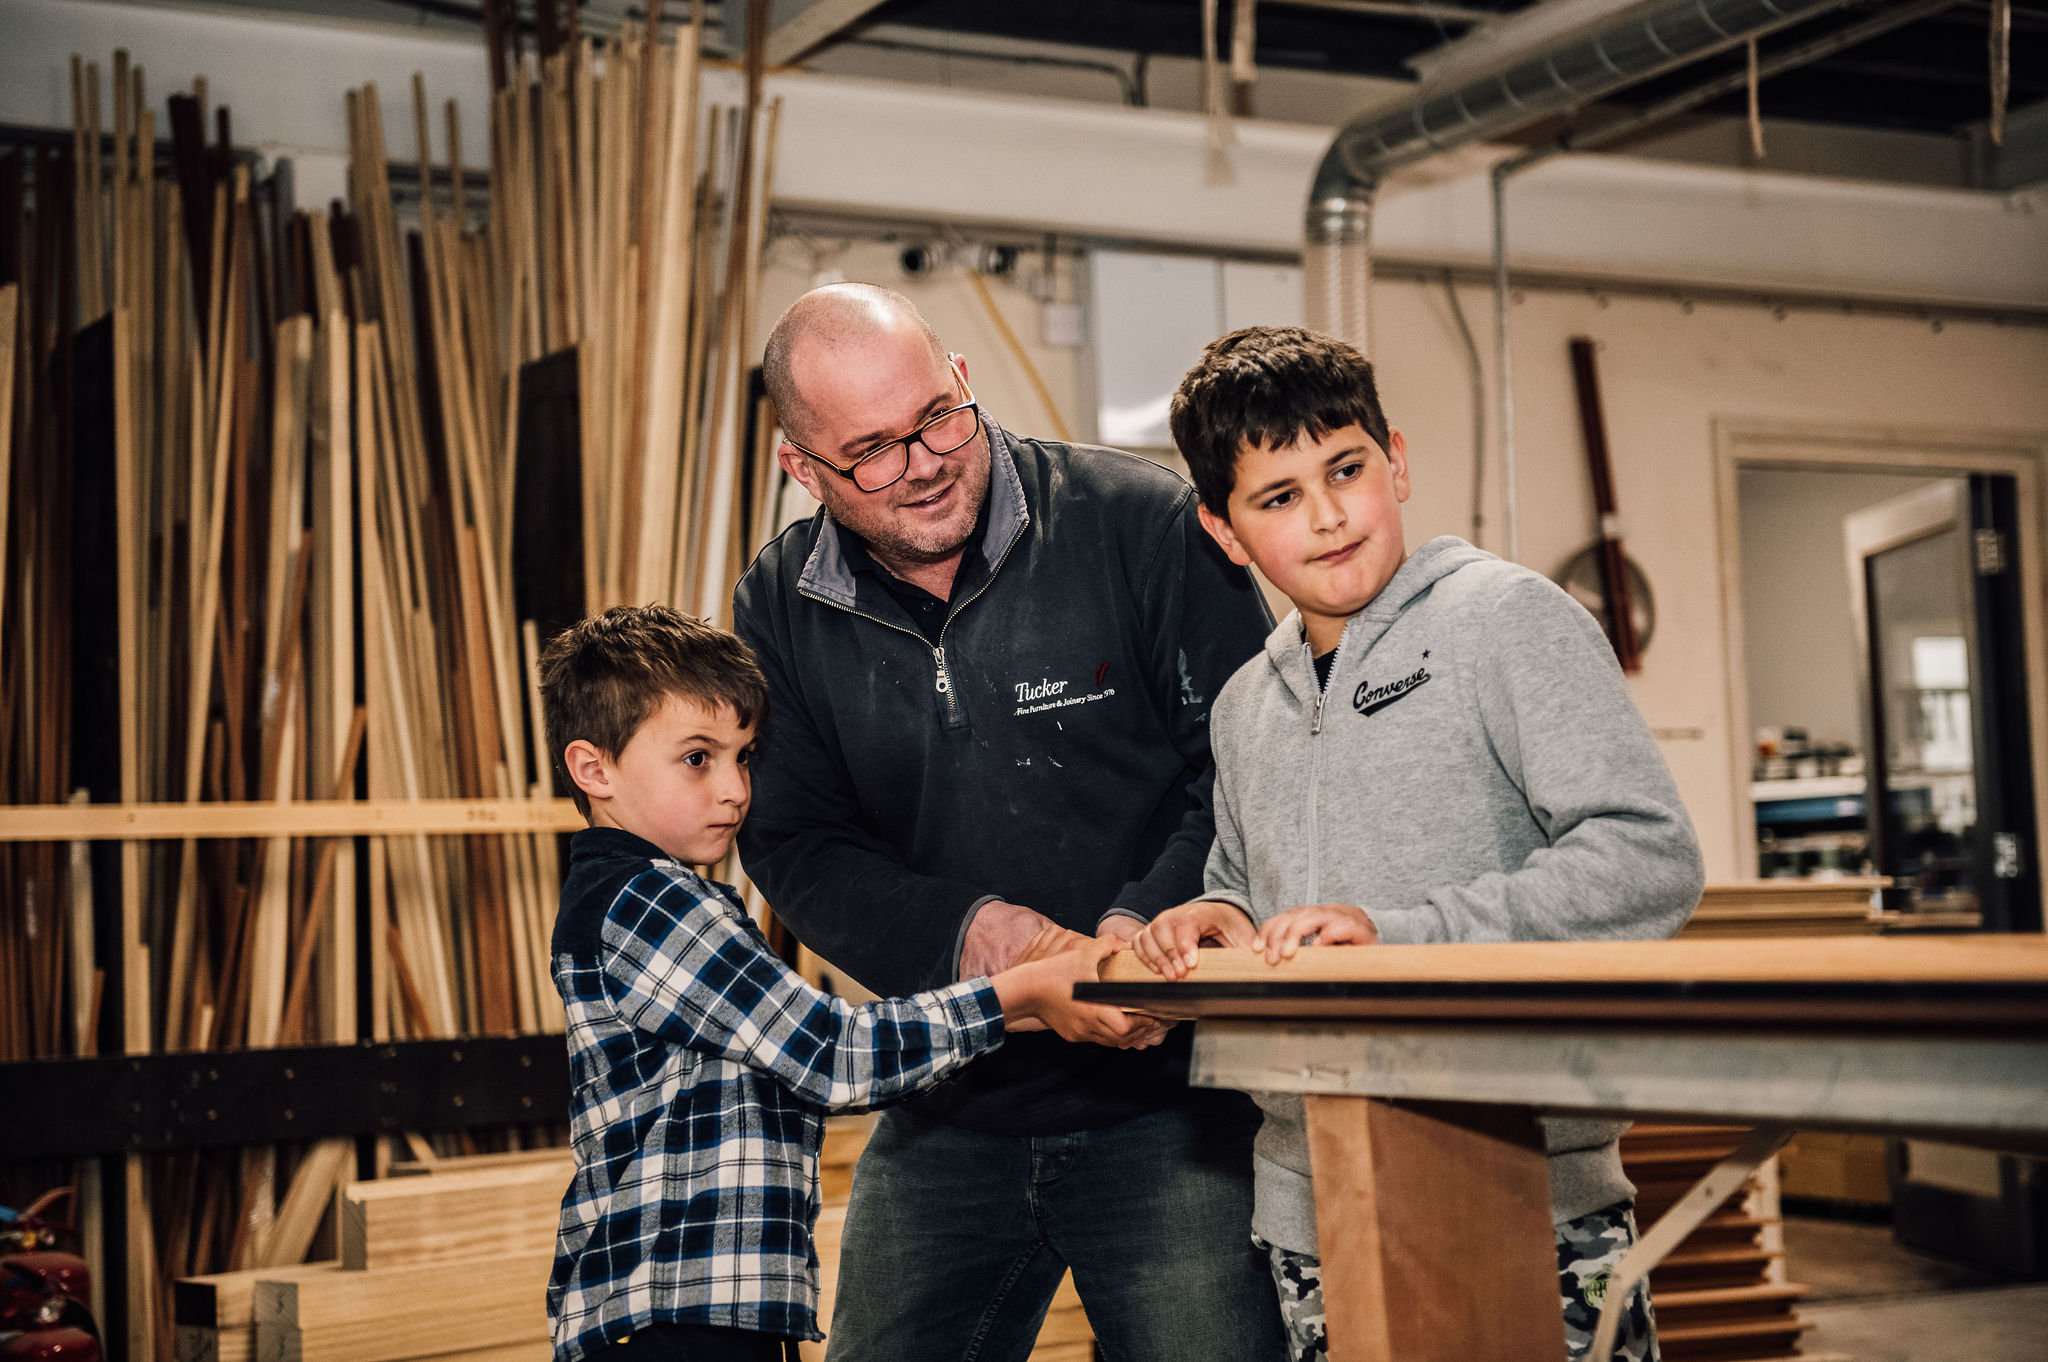 Lee Tucker and his two sons, Archie and Ollie, work together in the Tucker Joinery Workshop.